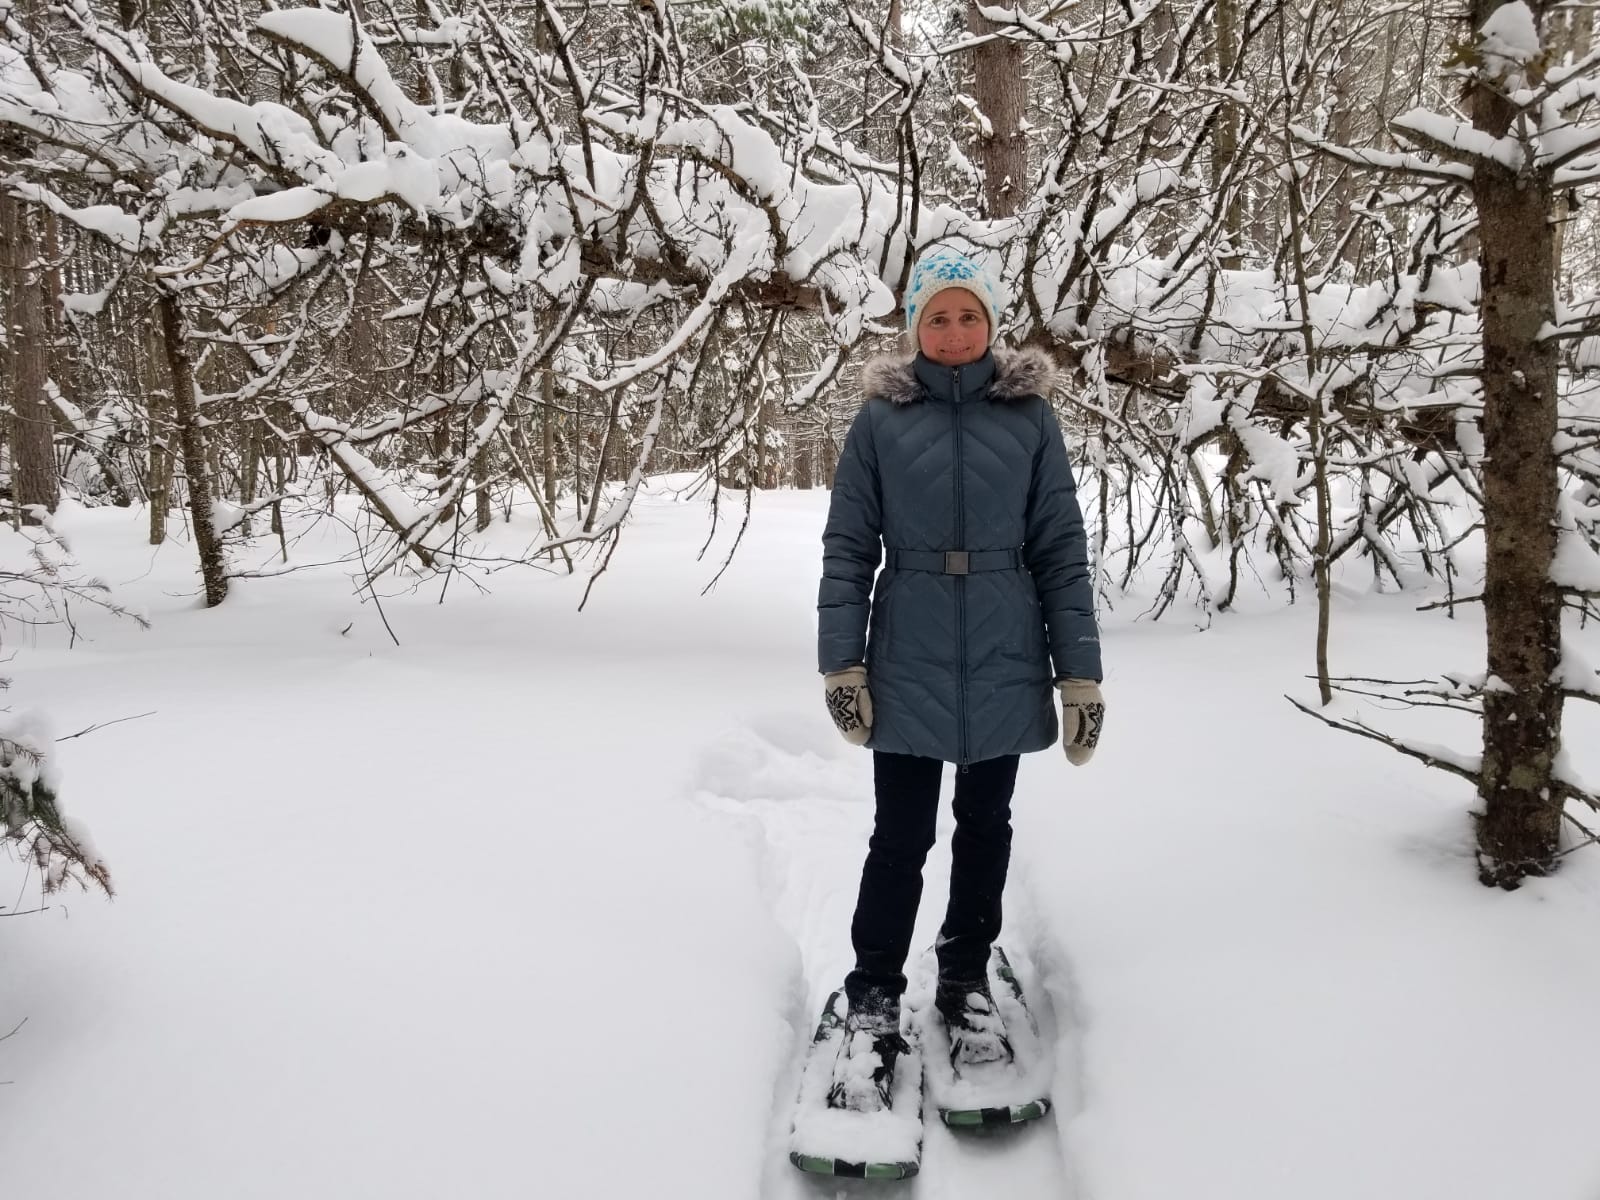 Elena on the mountain trail in snow shoes